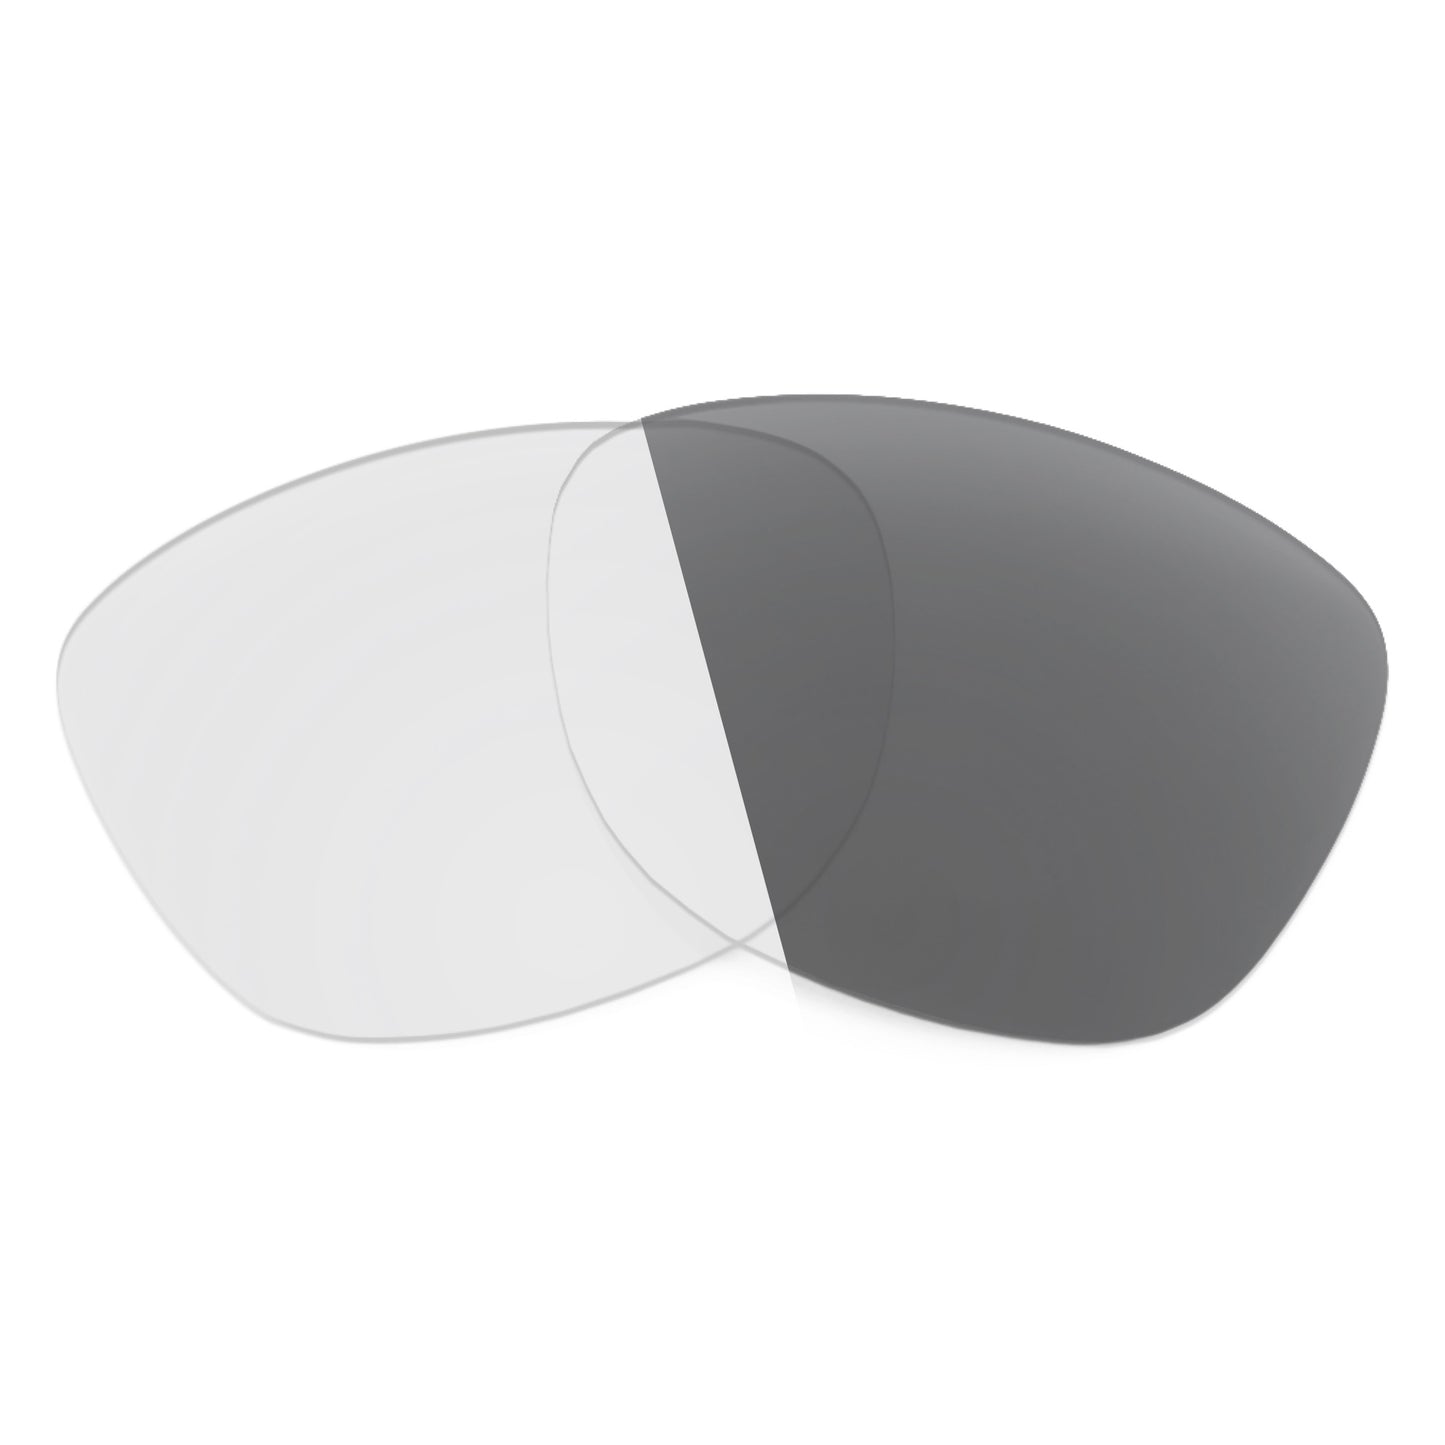 Revant replacement lenses for Ray-Ban Thalia RB2195 53mm Non-Polarized Adapt Gray Photochromic